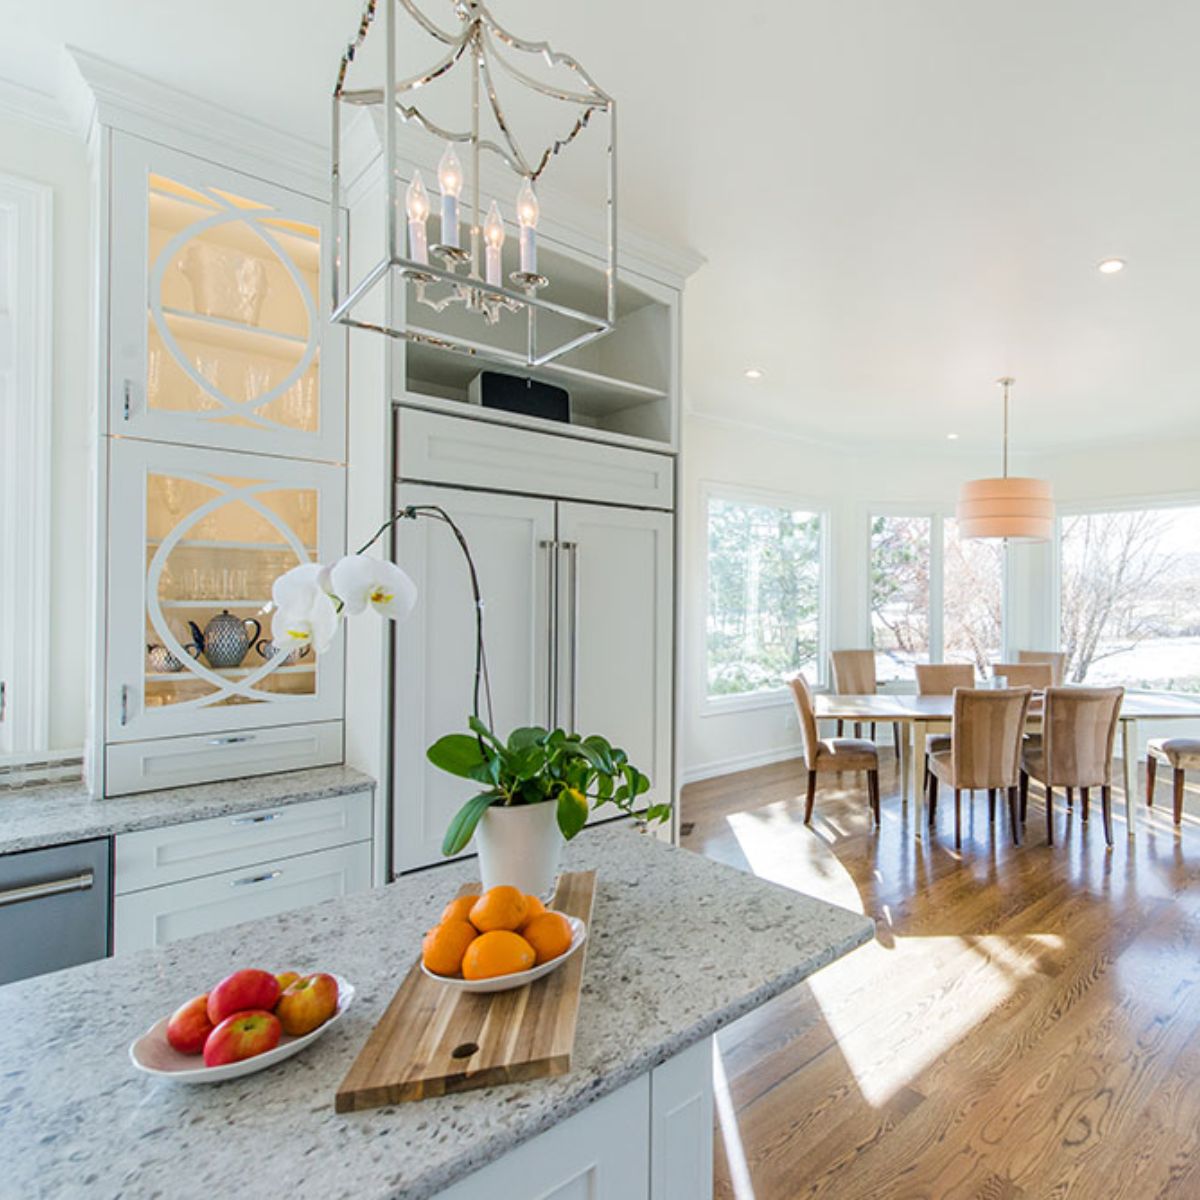 5 Benefits of Working with a Professional Kitchen Designer